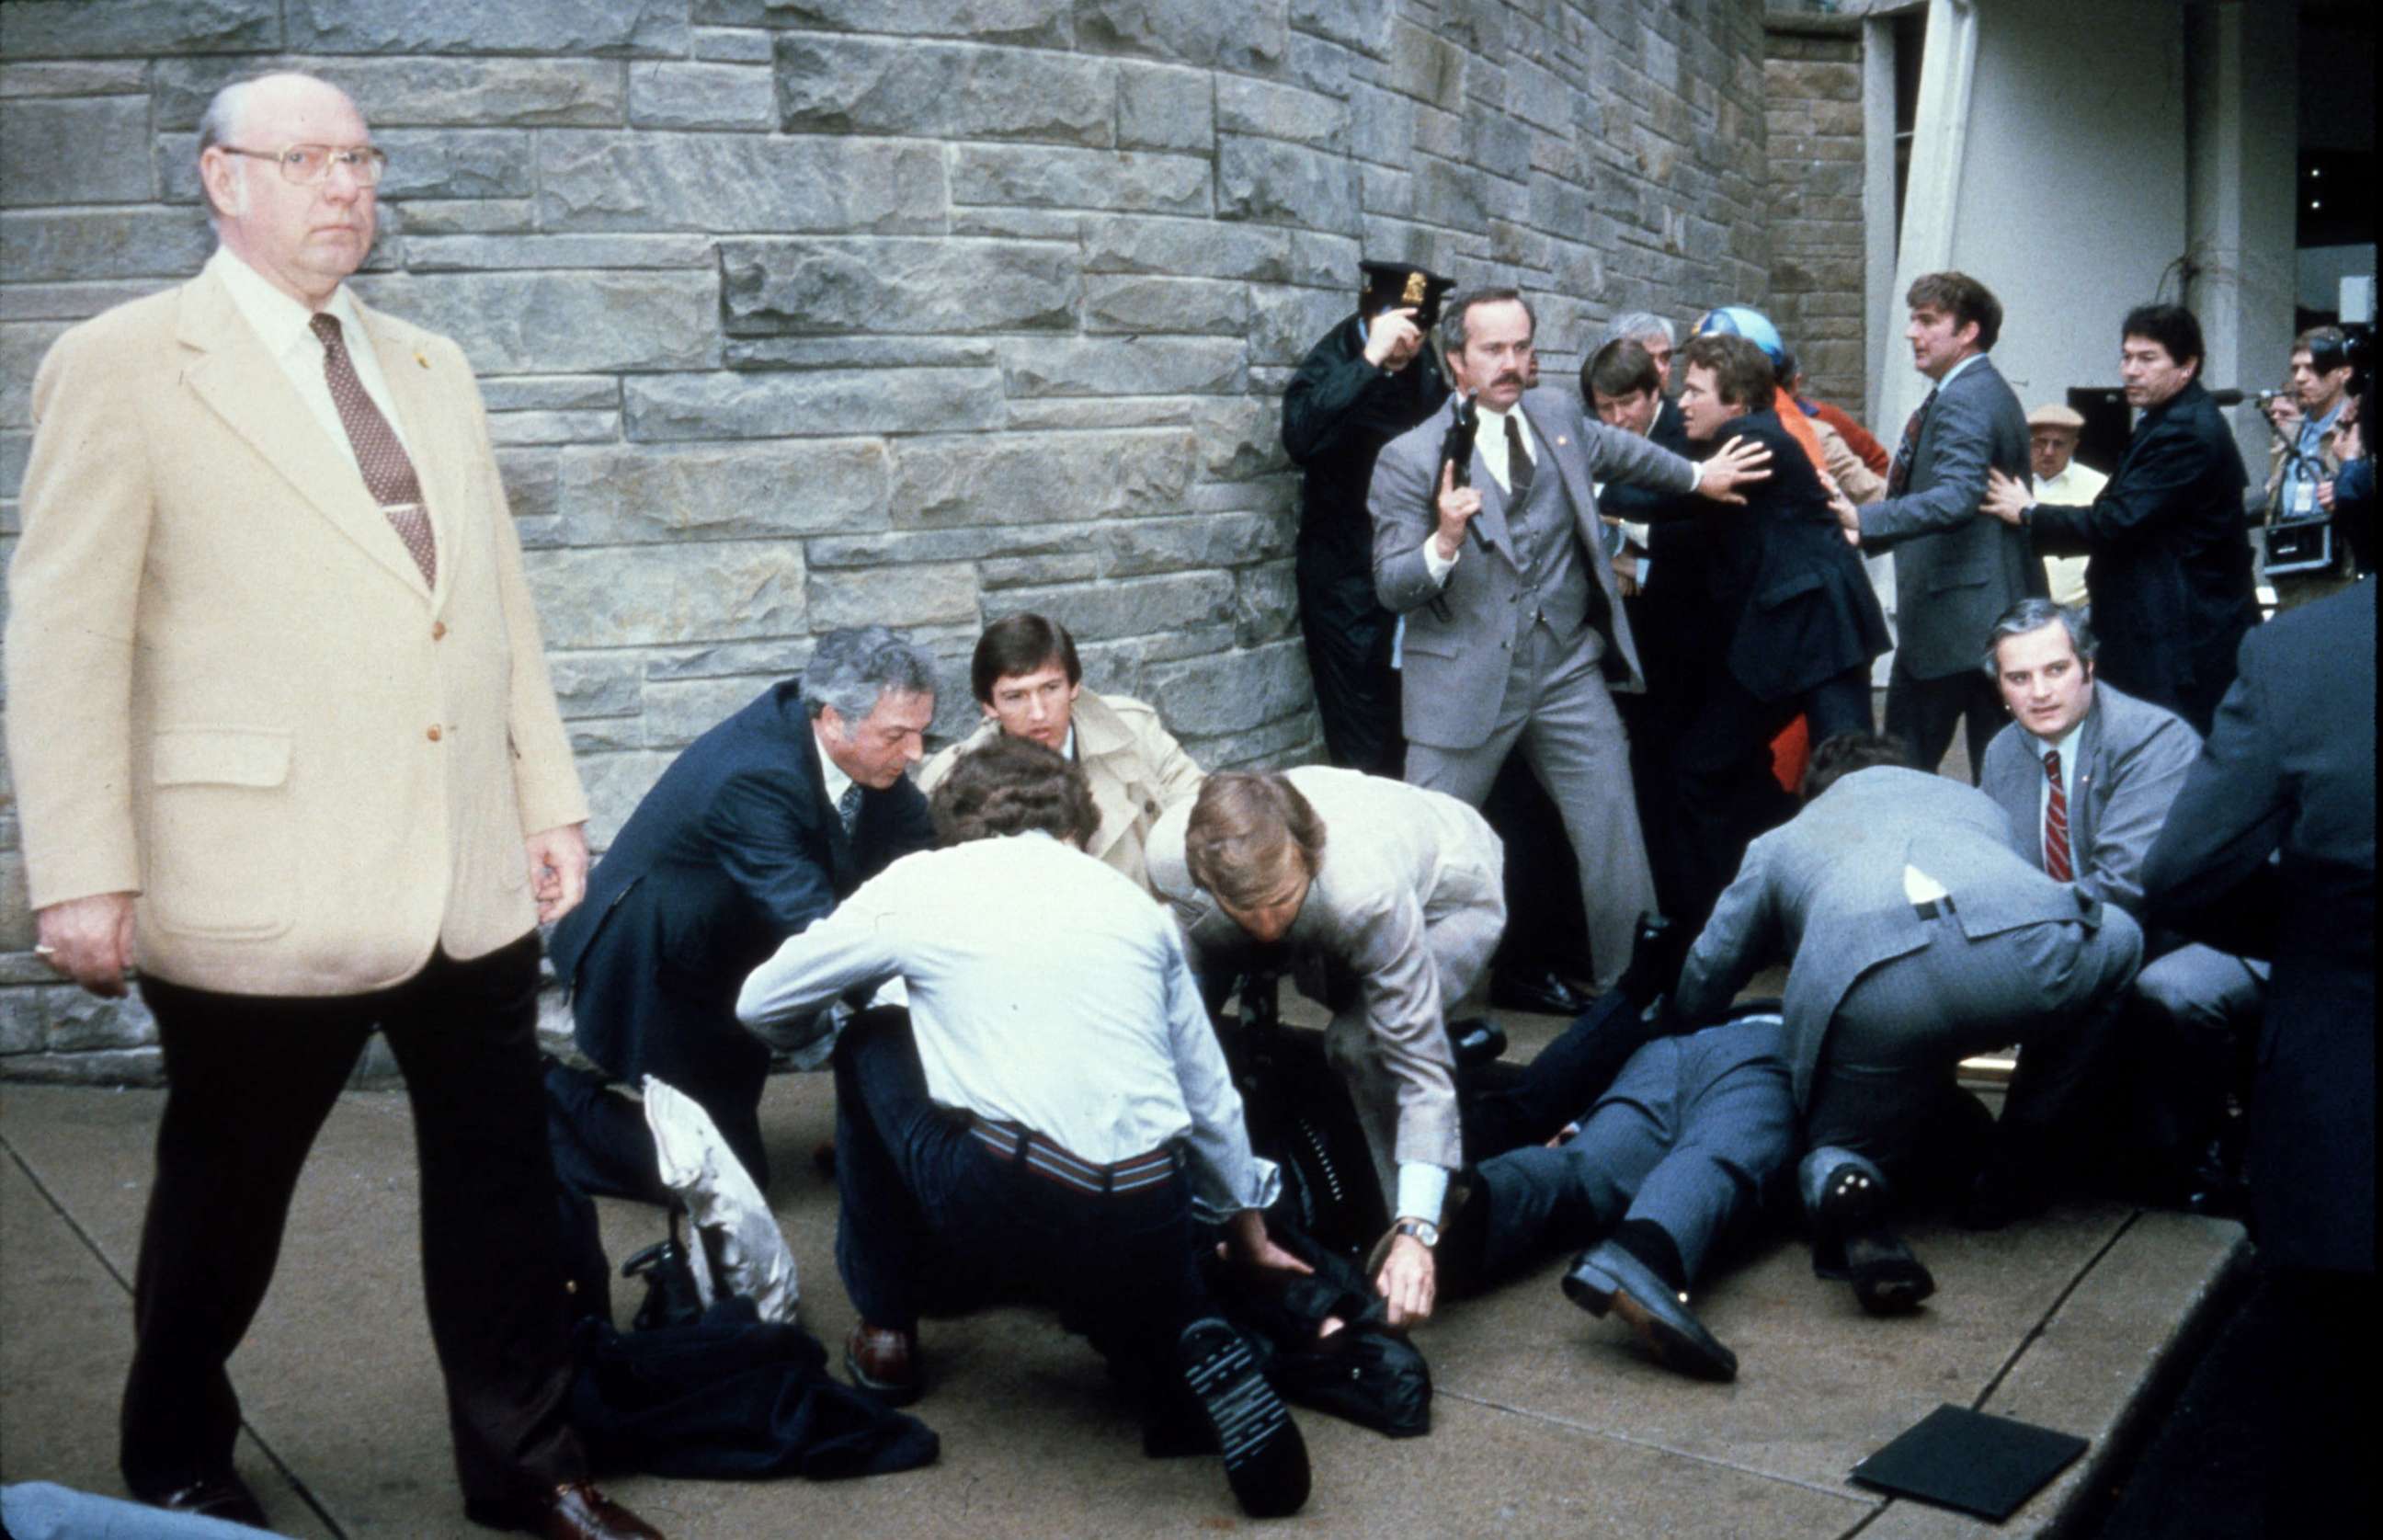 PHOTO: Chaos surrounds shooting victims President Ronald Reagan and Press Secretary James Brady after an assassination attempt in Washington, March 30, 1981.